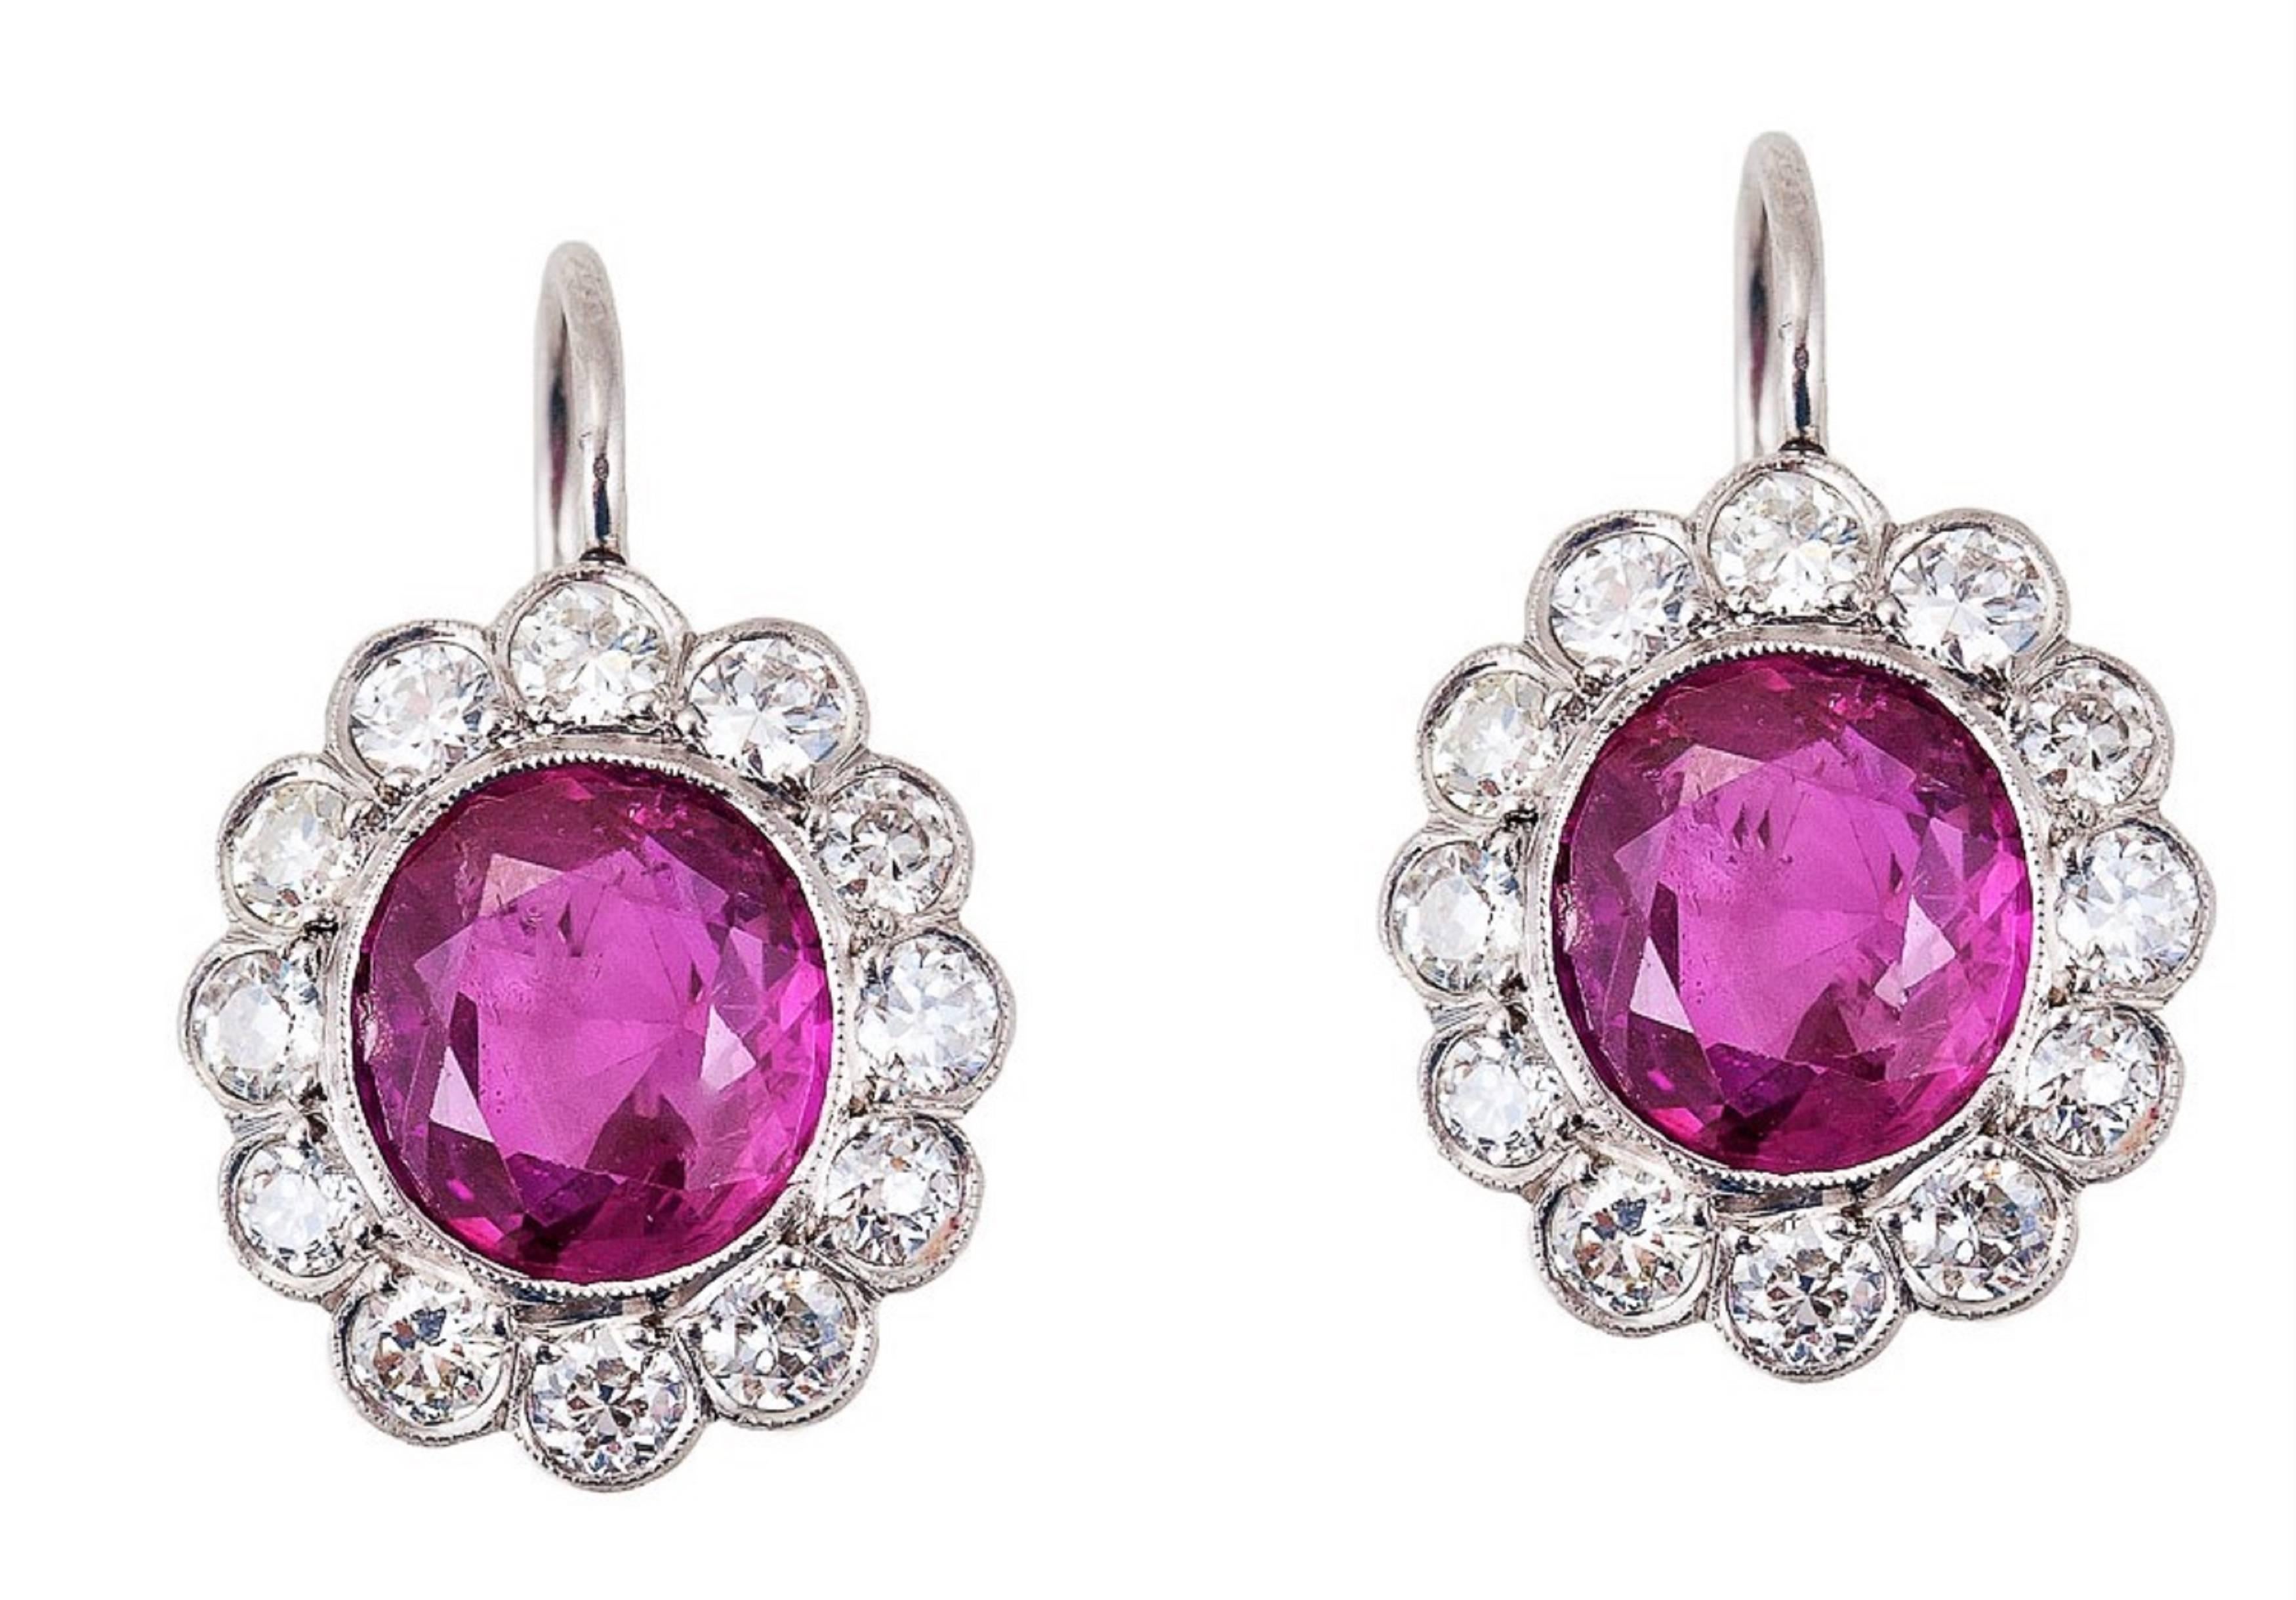 Gubelin Certified No-Heat 6.52 CT Burma Ruby Diamond Platinum Edwardian Earrings In Excellent Condition For Sale In Calabasas, CA